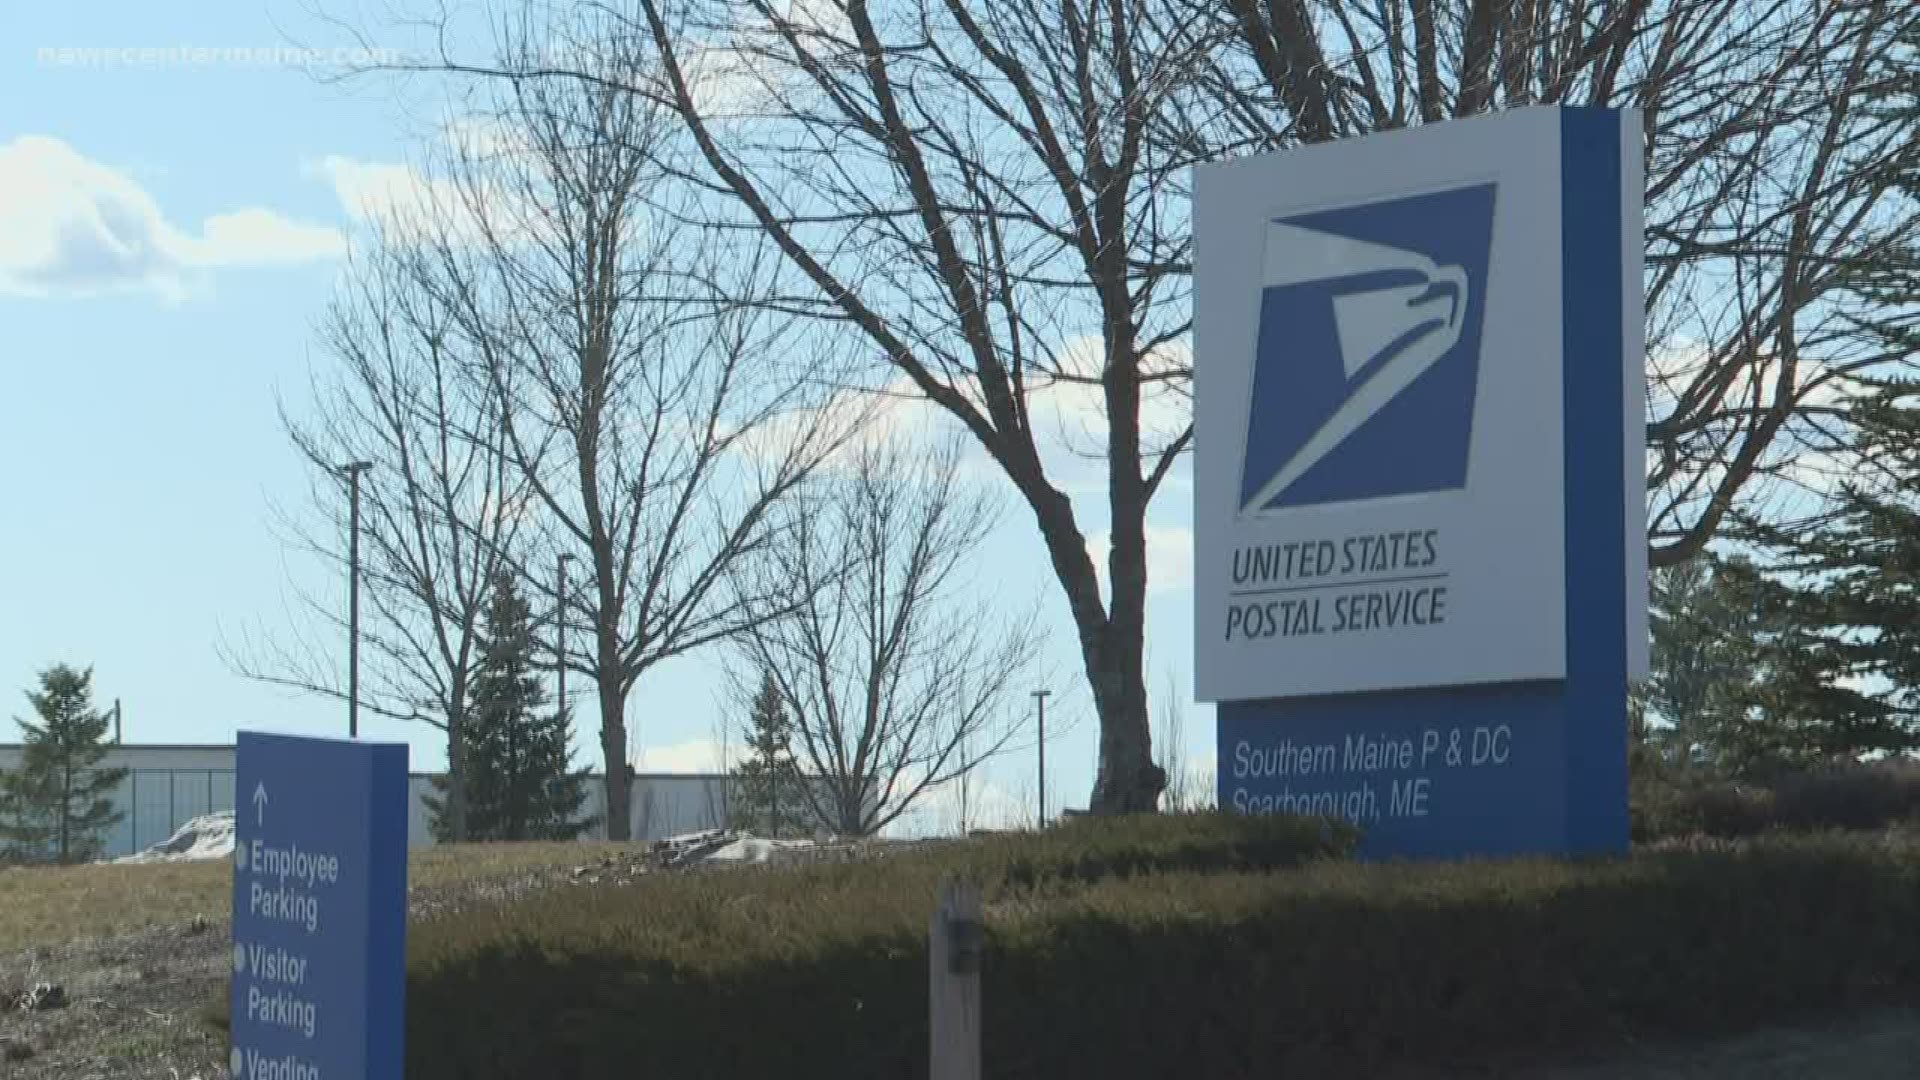 A delivery unit in Portland was also affected. According to the Postal Inspection Service, anyone mailing injurious or hazardous materials could face legal penalties